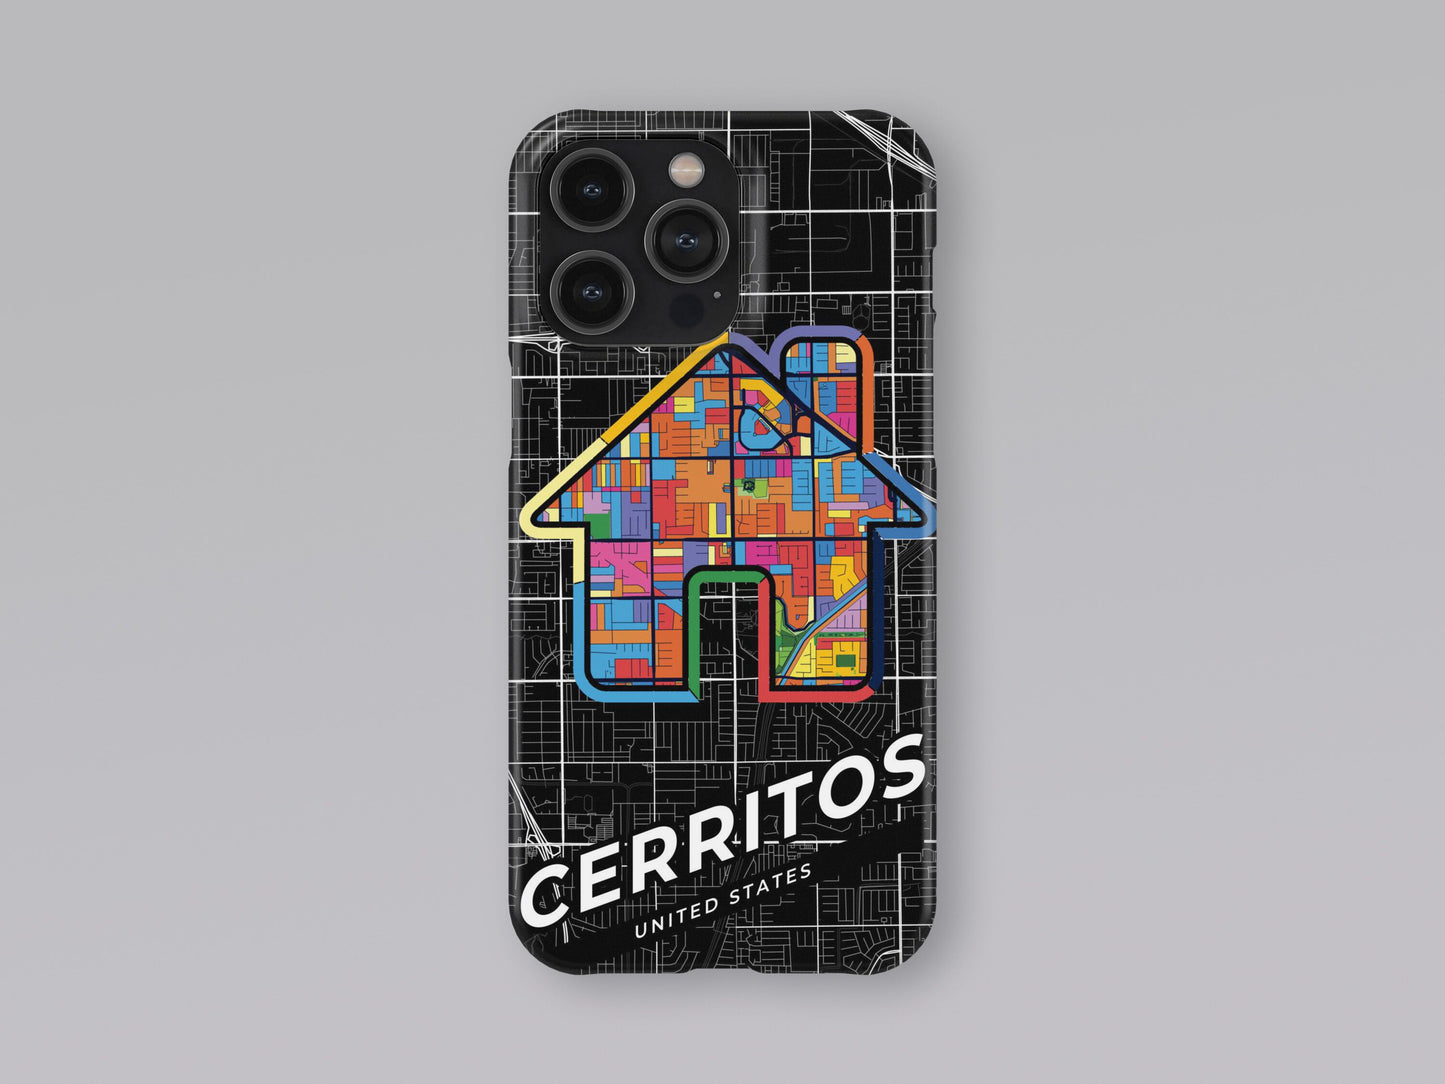 Cerritos California slim phone case with colorful icon. Birthday, wedding or housewarming gift. Couple match cases. 3